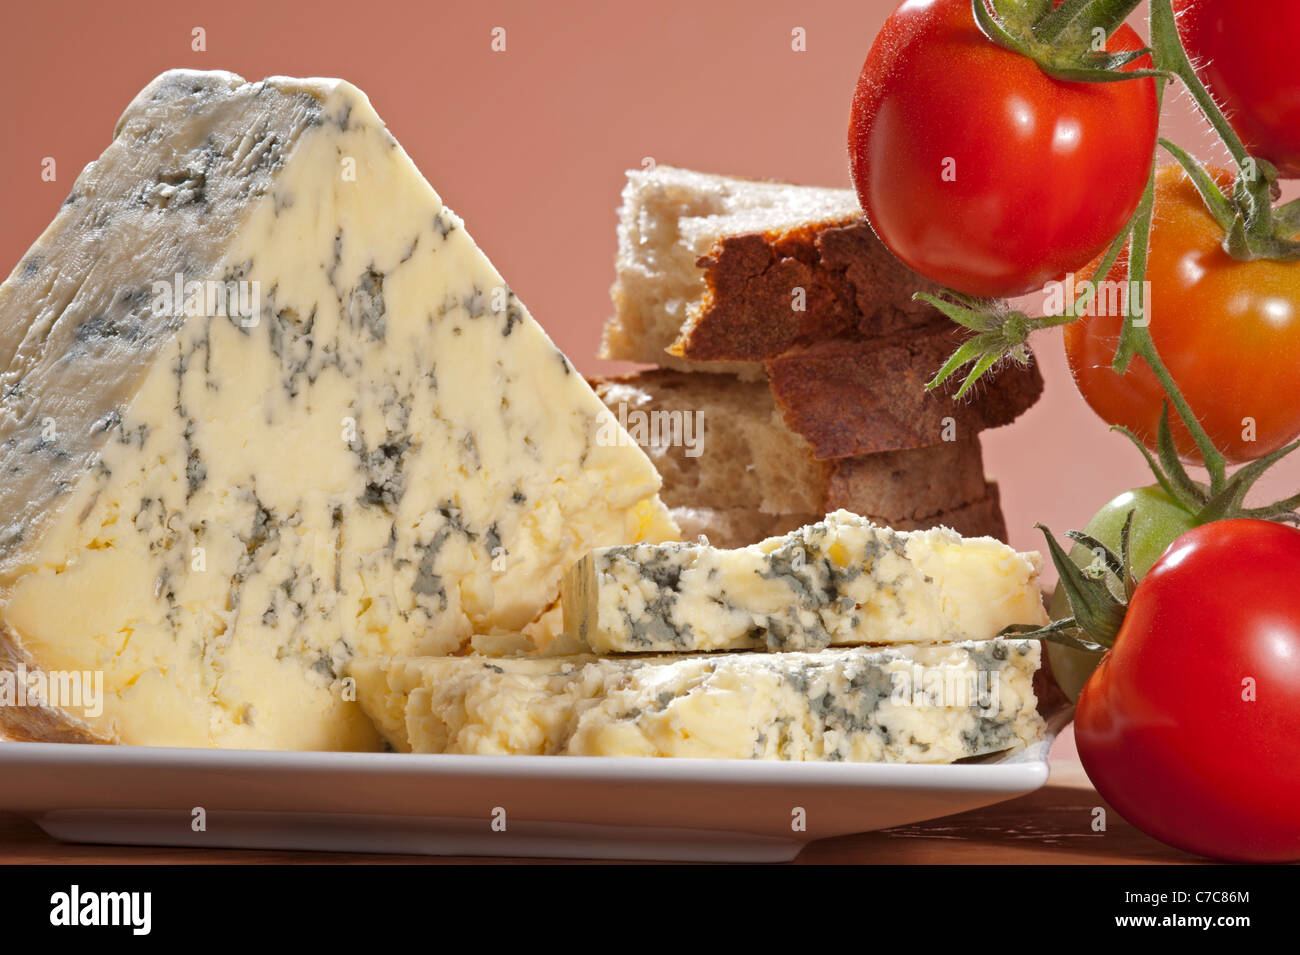 Slice of full fat soft blue cheese Stock Photo